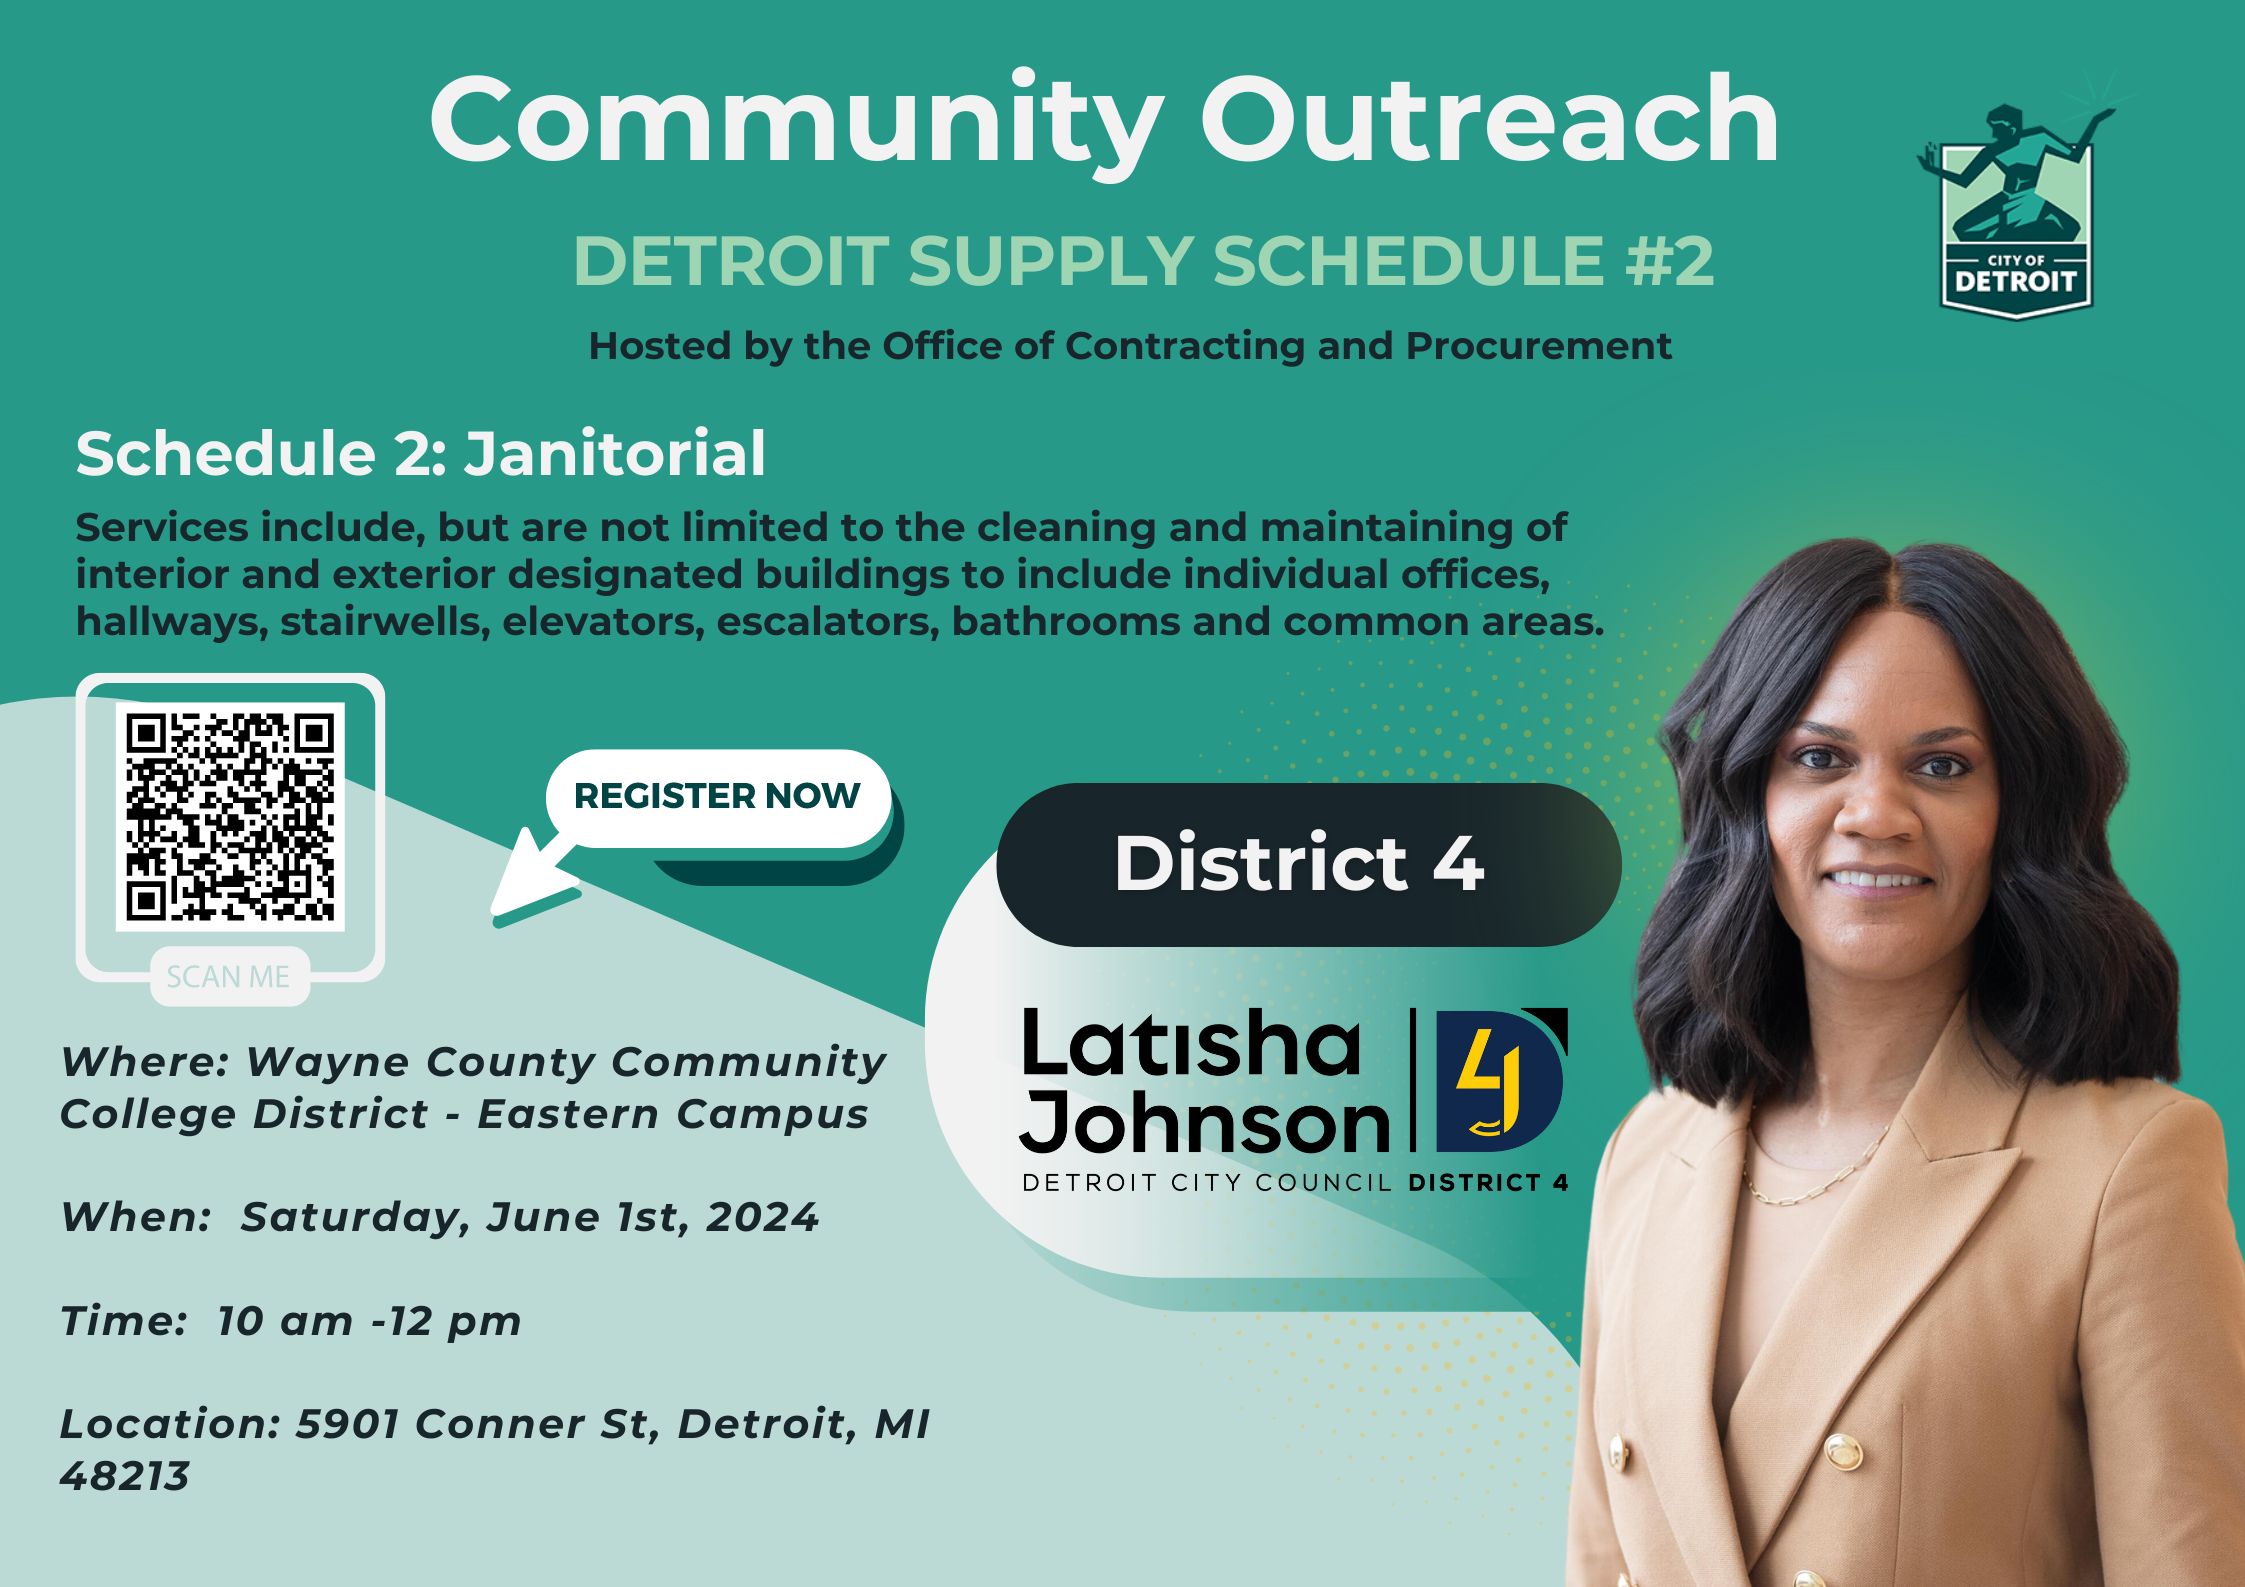 Community Outreach DSS#2 - Janitorial (June 1st)